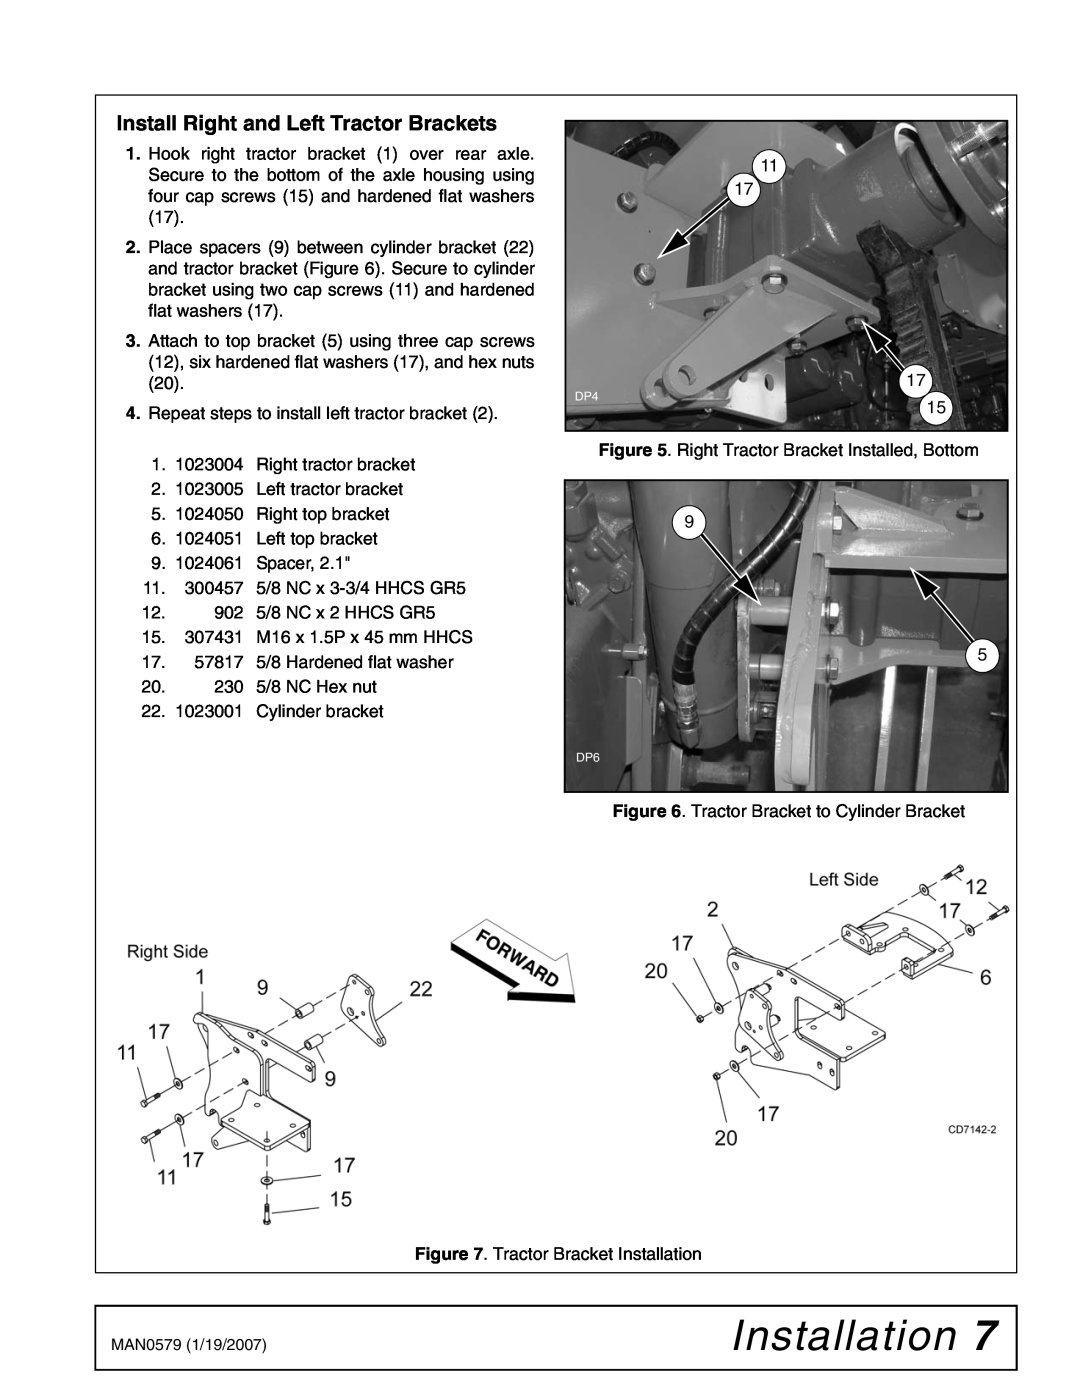 Woods Equipment 1023000 installation manual Install Right and Left Tractor Brackets, Installation 